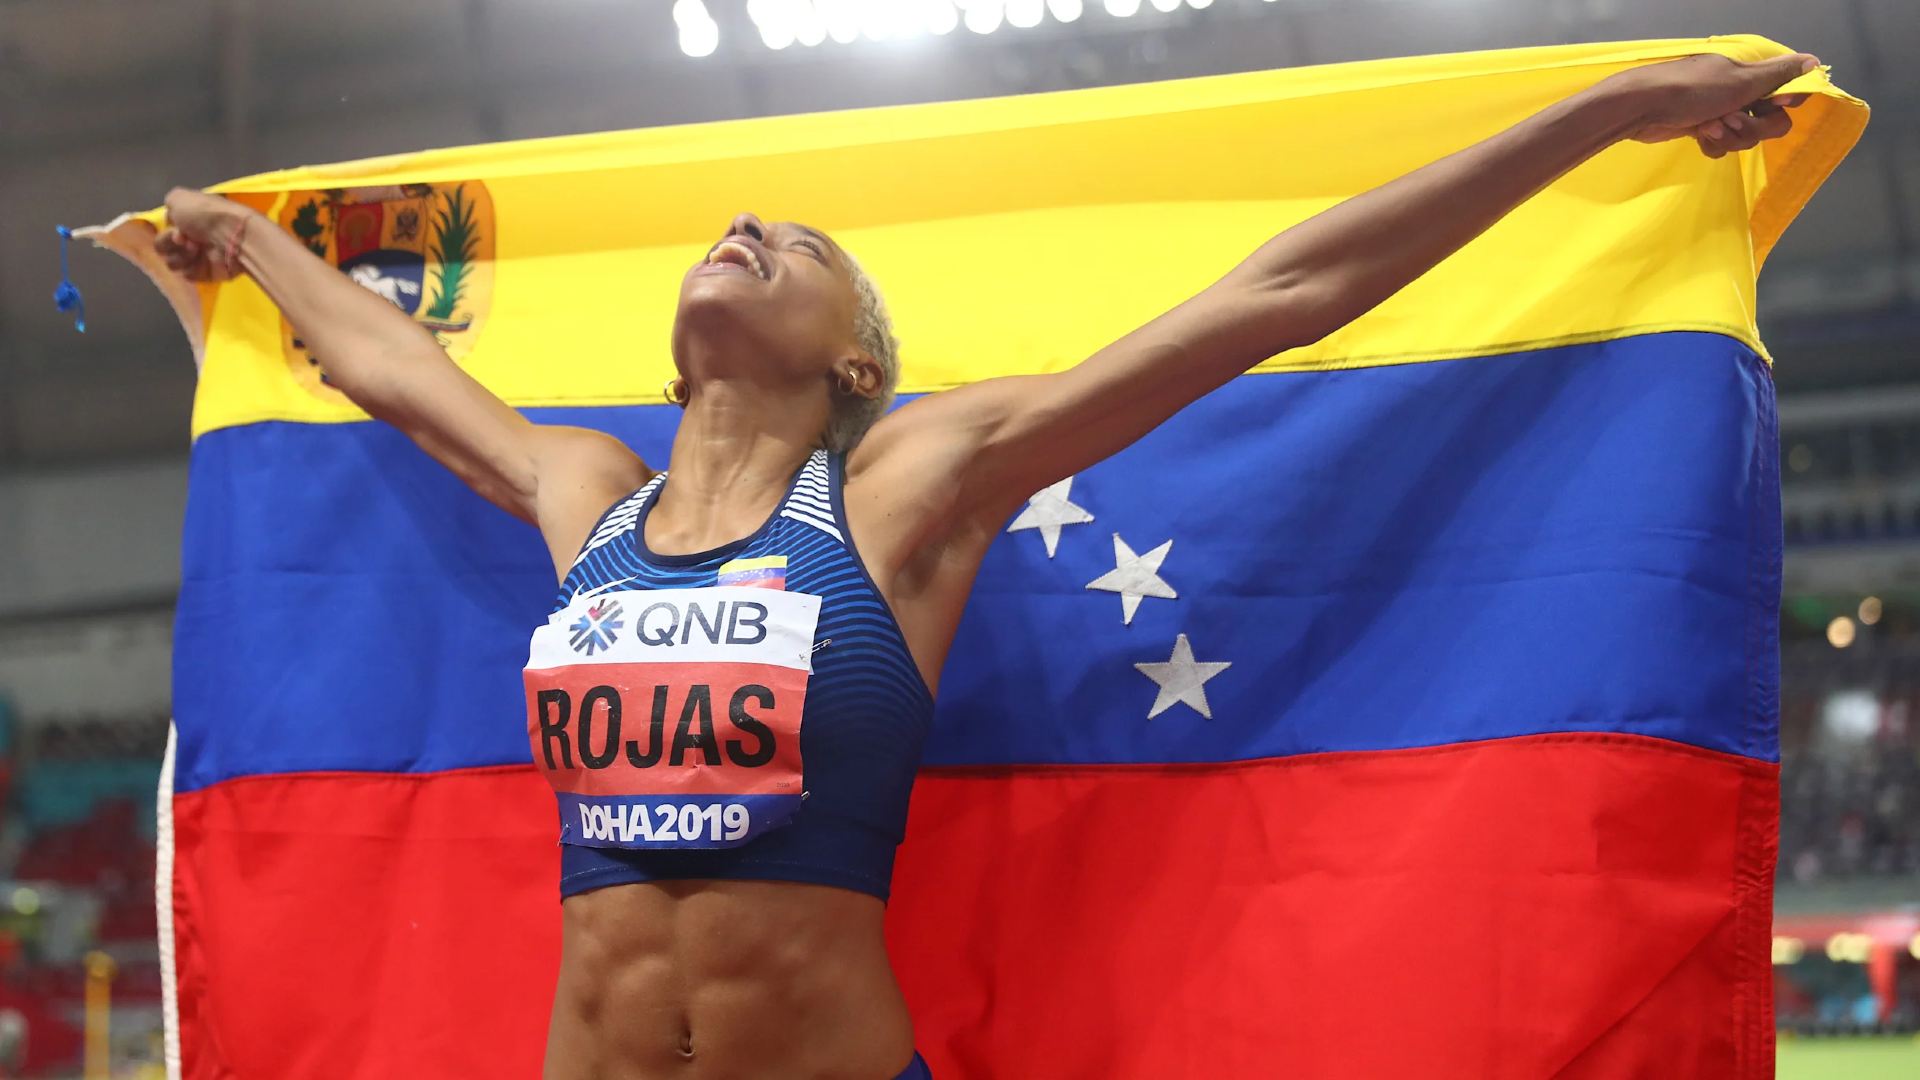 Yulimar Rojas holding the Venezuelan flag after winning the World Championships Doha 2019 (Image Credits - Instagram/ @yulimarrojas45)